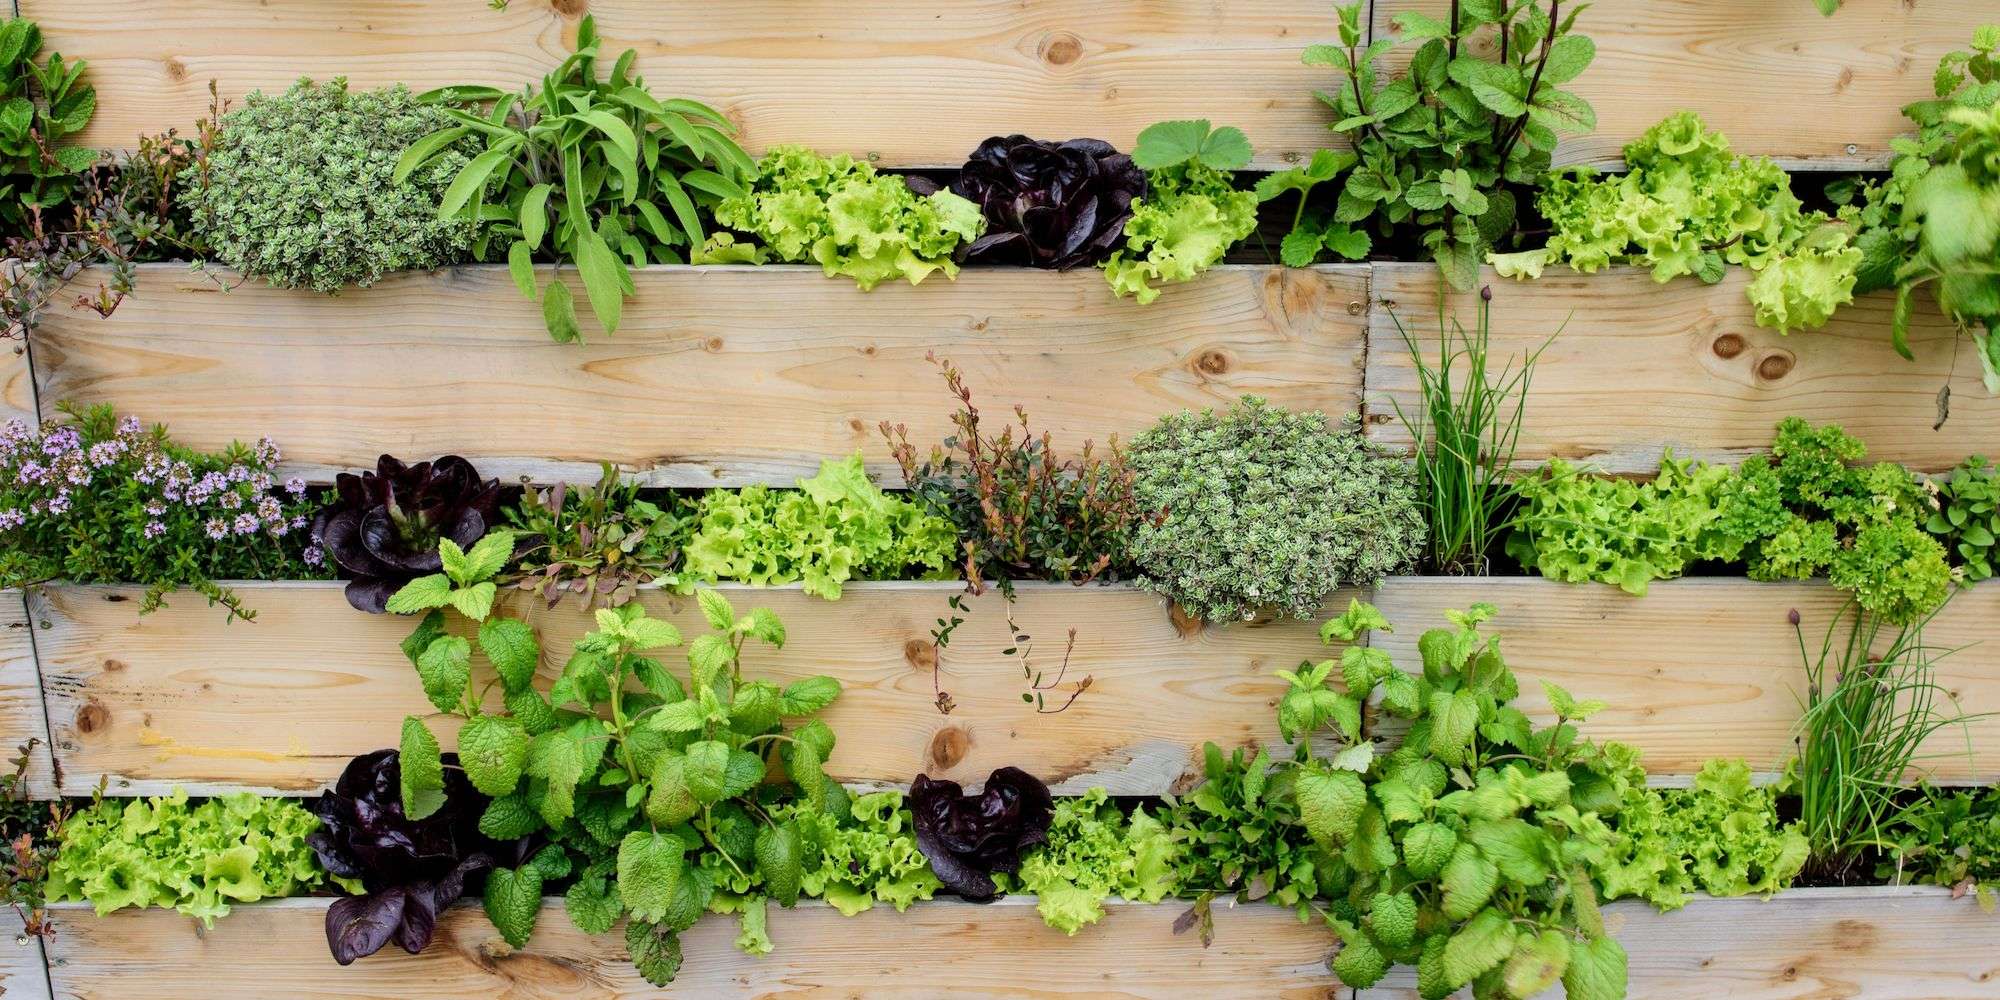 A simple wooden vertical garden filled with growing plants